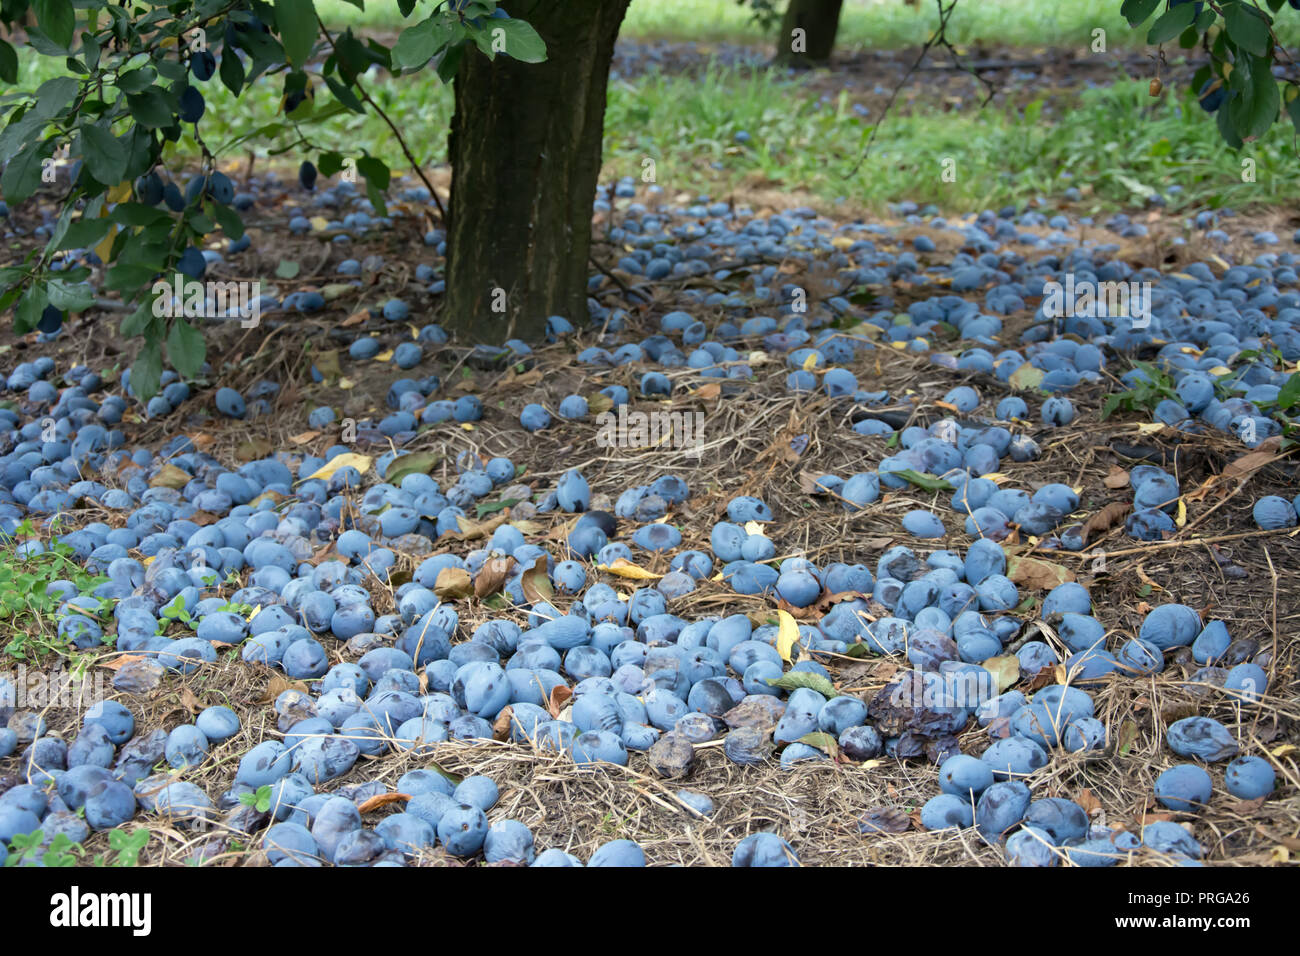 Windfall of blue common plums lying on the ground under a plum tree Stock Photo